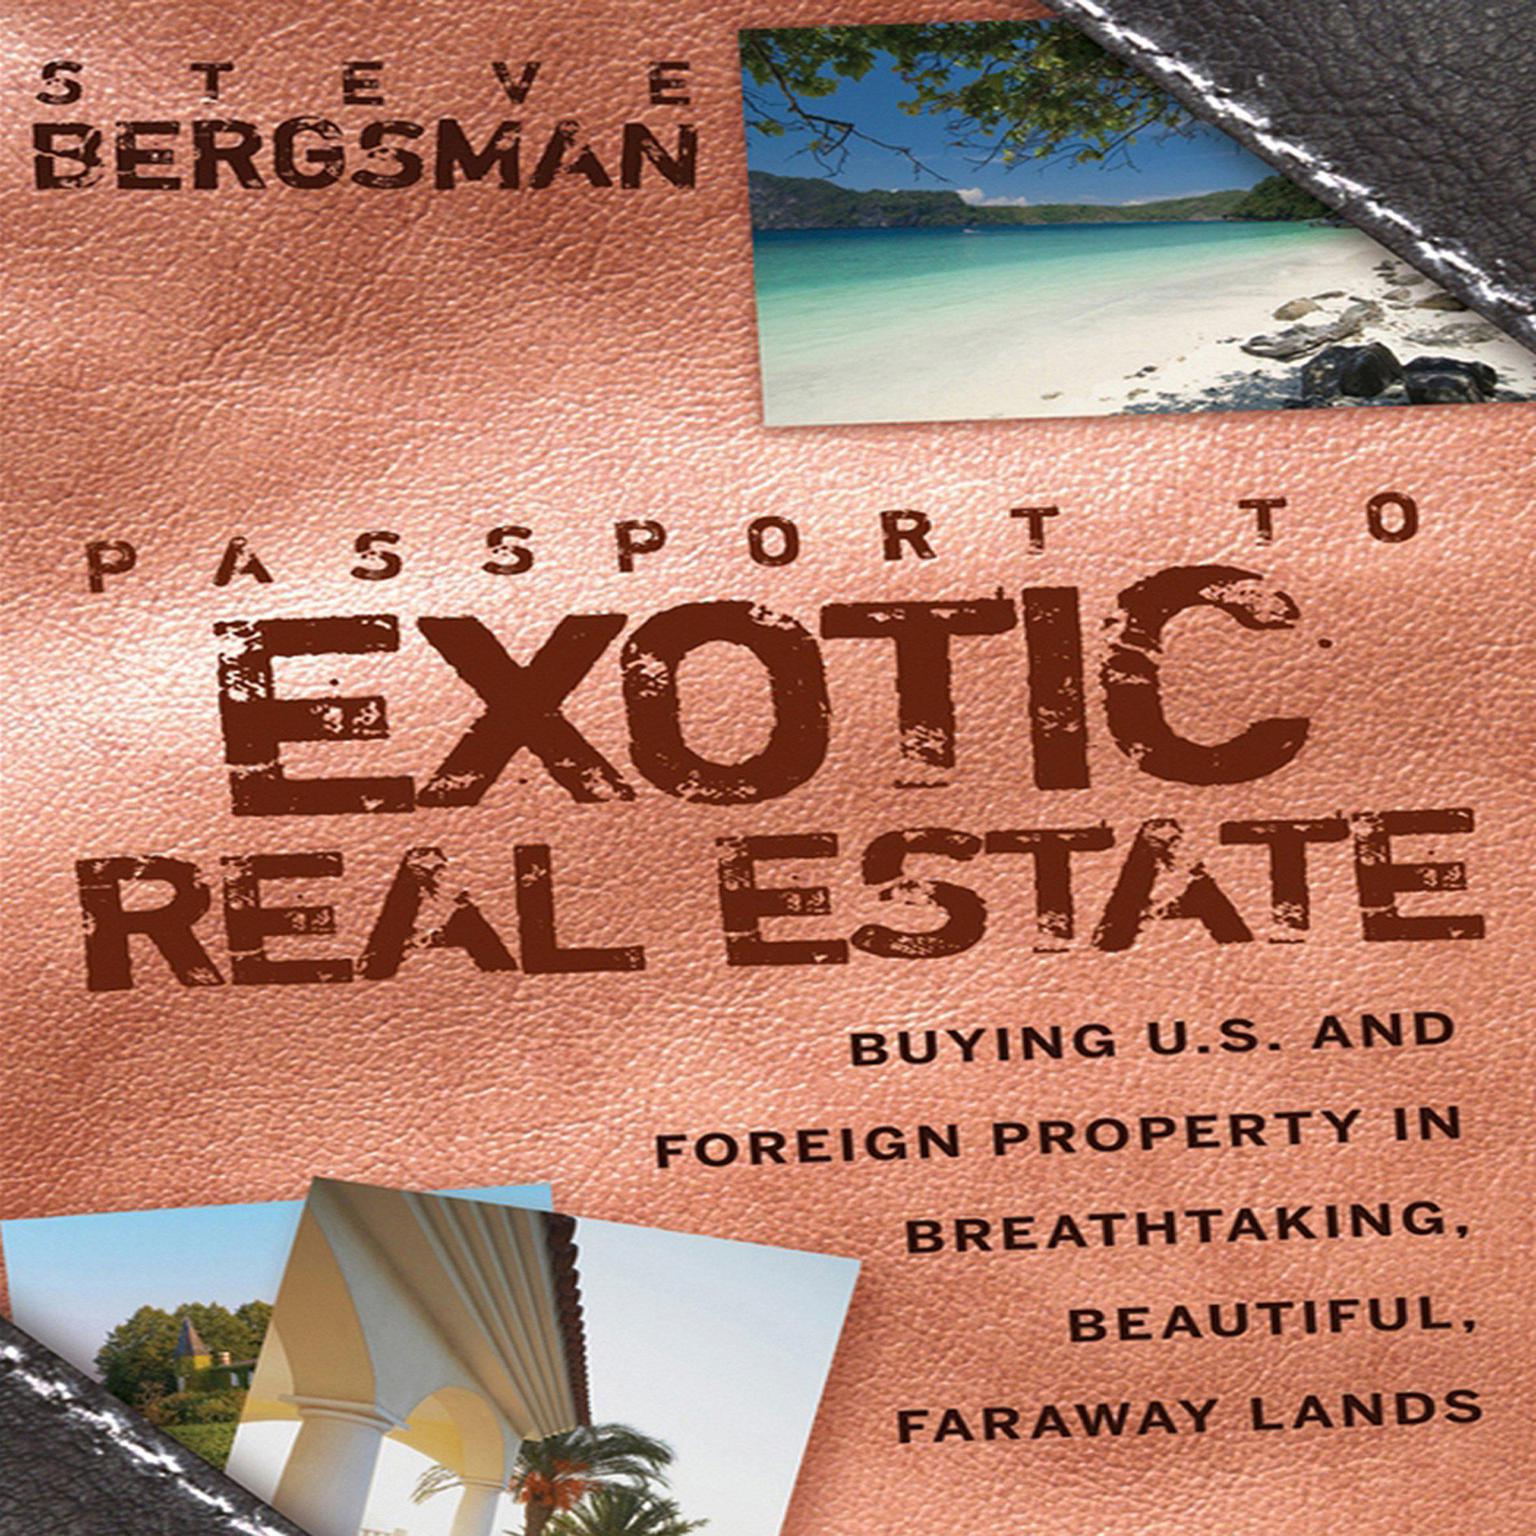 Passport to Exotic Real Estate: Buying U.S. And Foreign Property In Breath-Taking, Beautiful, Faraway Lands  Audiobook, by Steve Bergsman